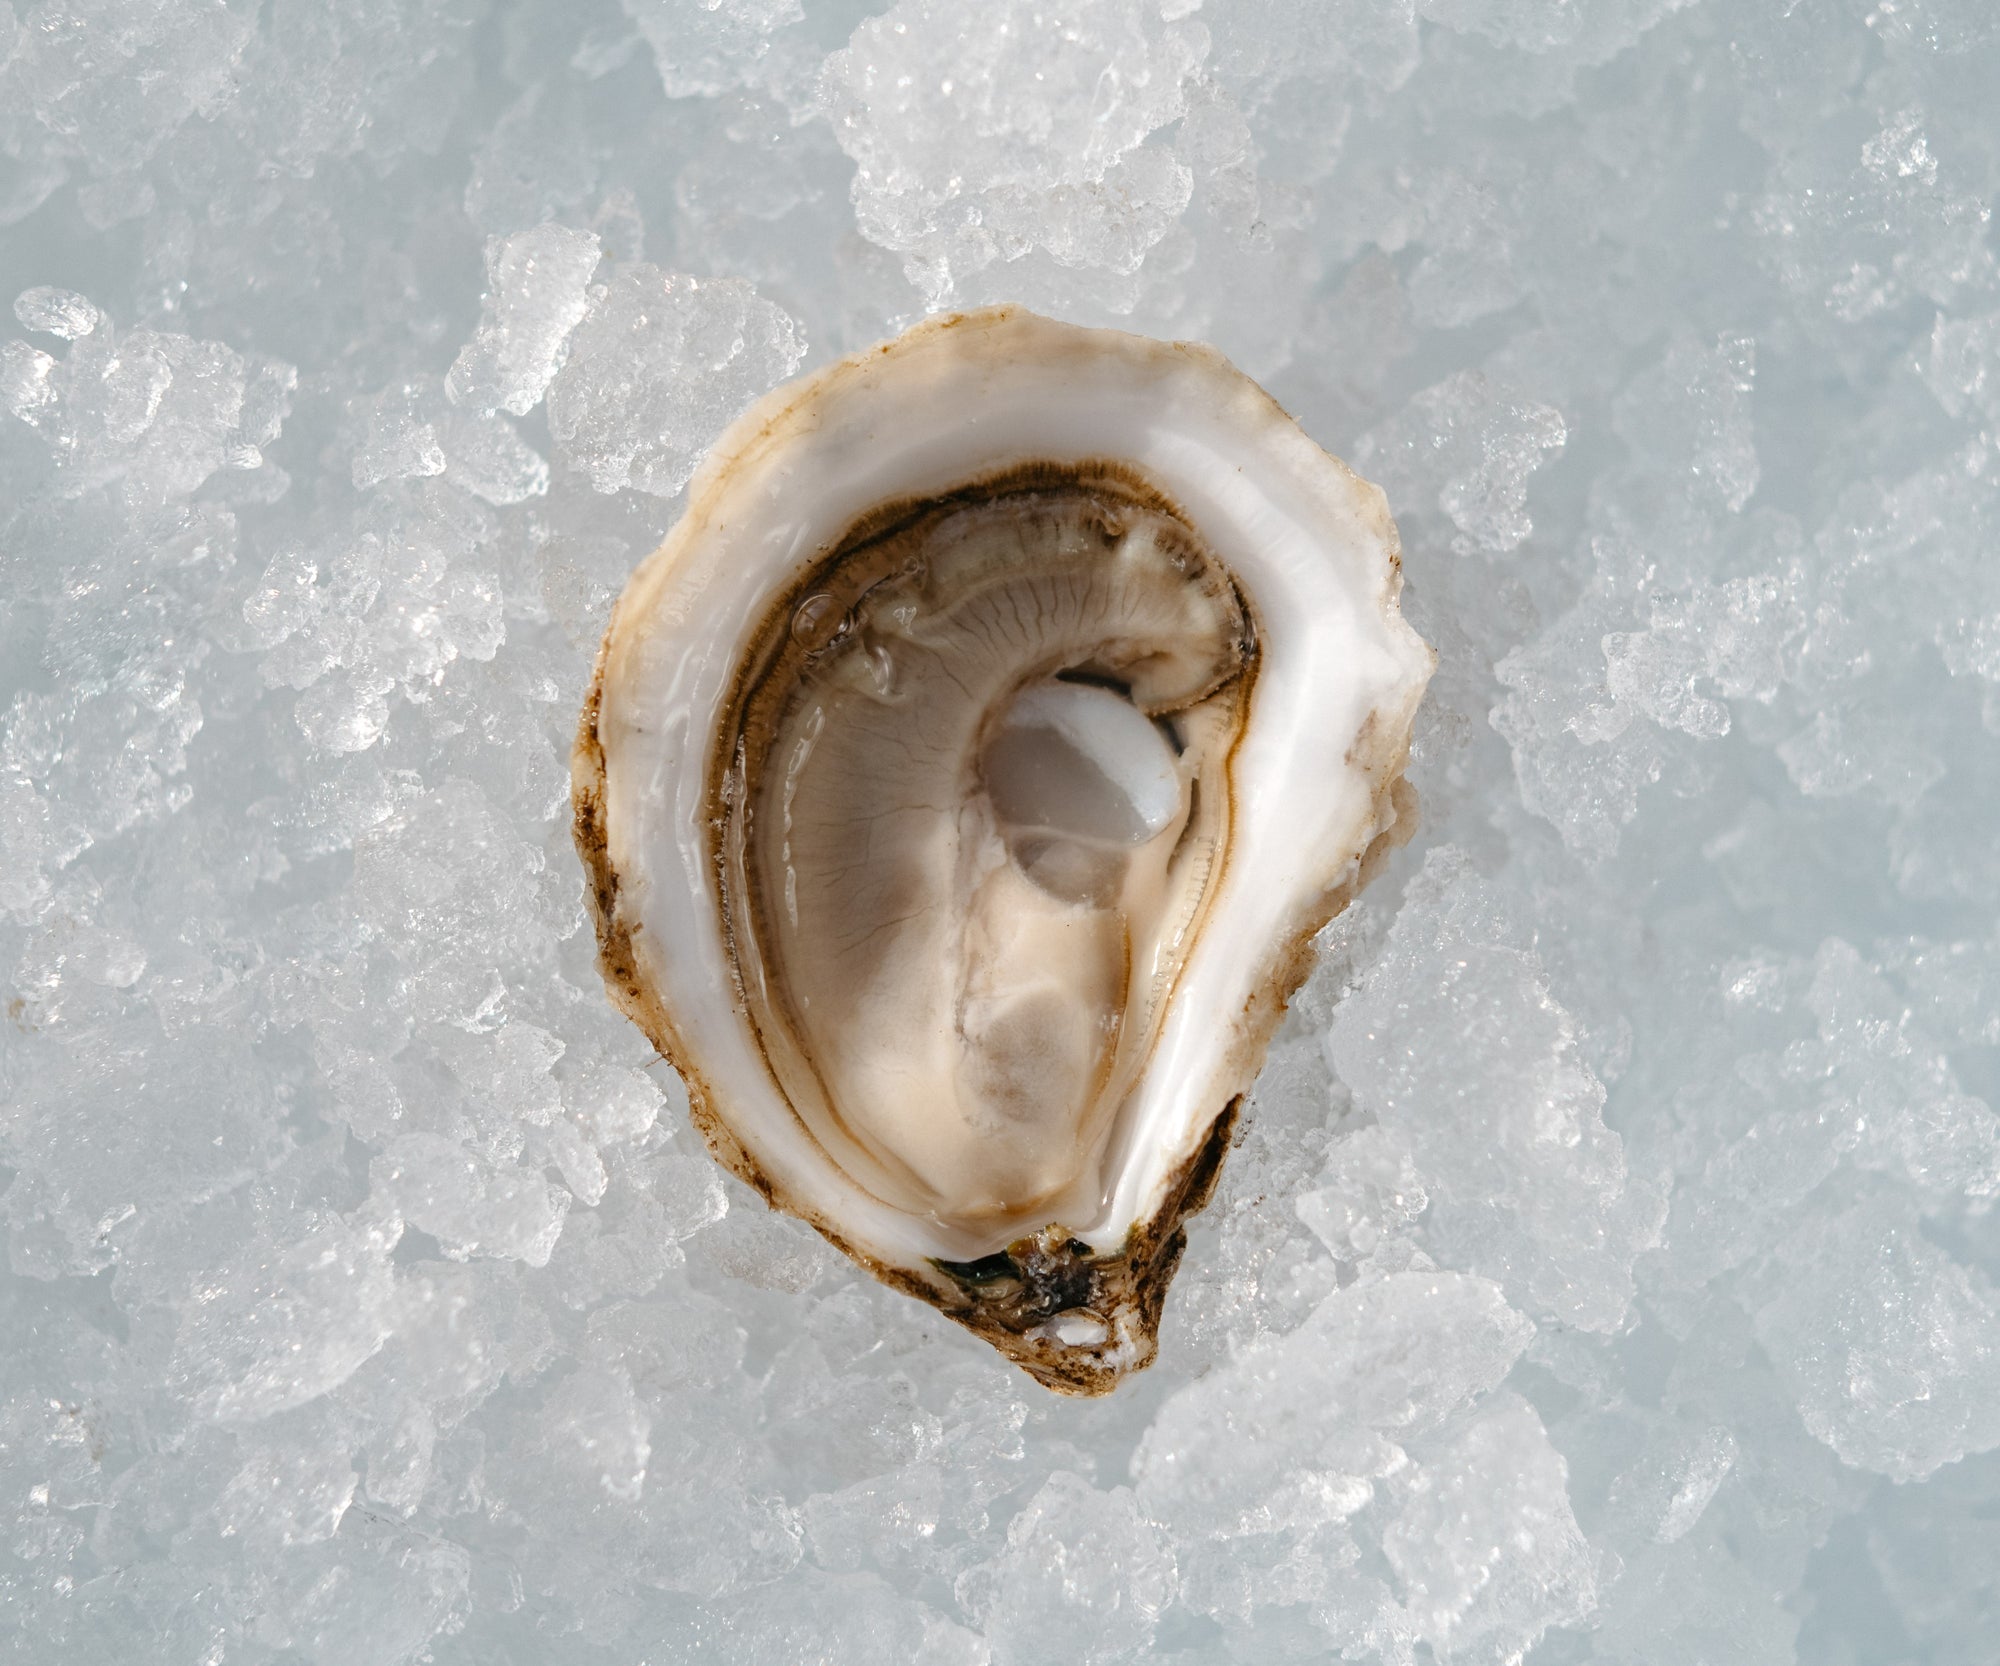 Whitehaven Oysters from Nova Scotia, CAN